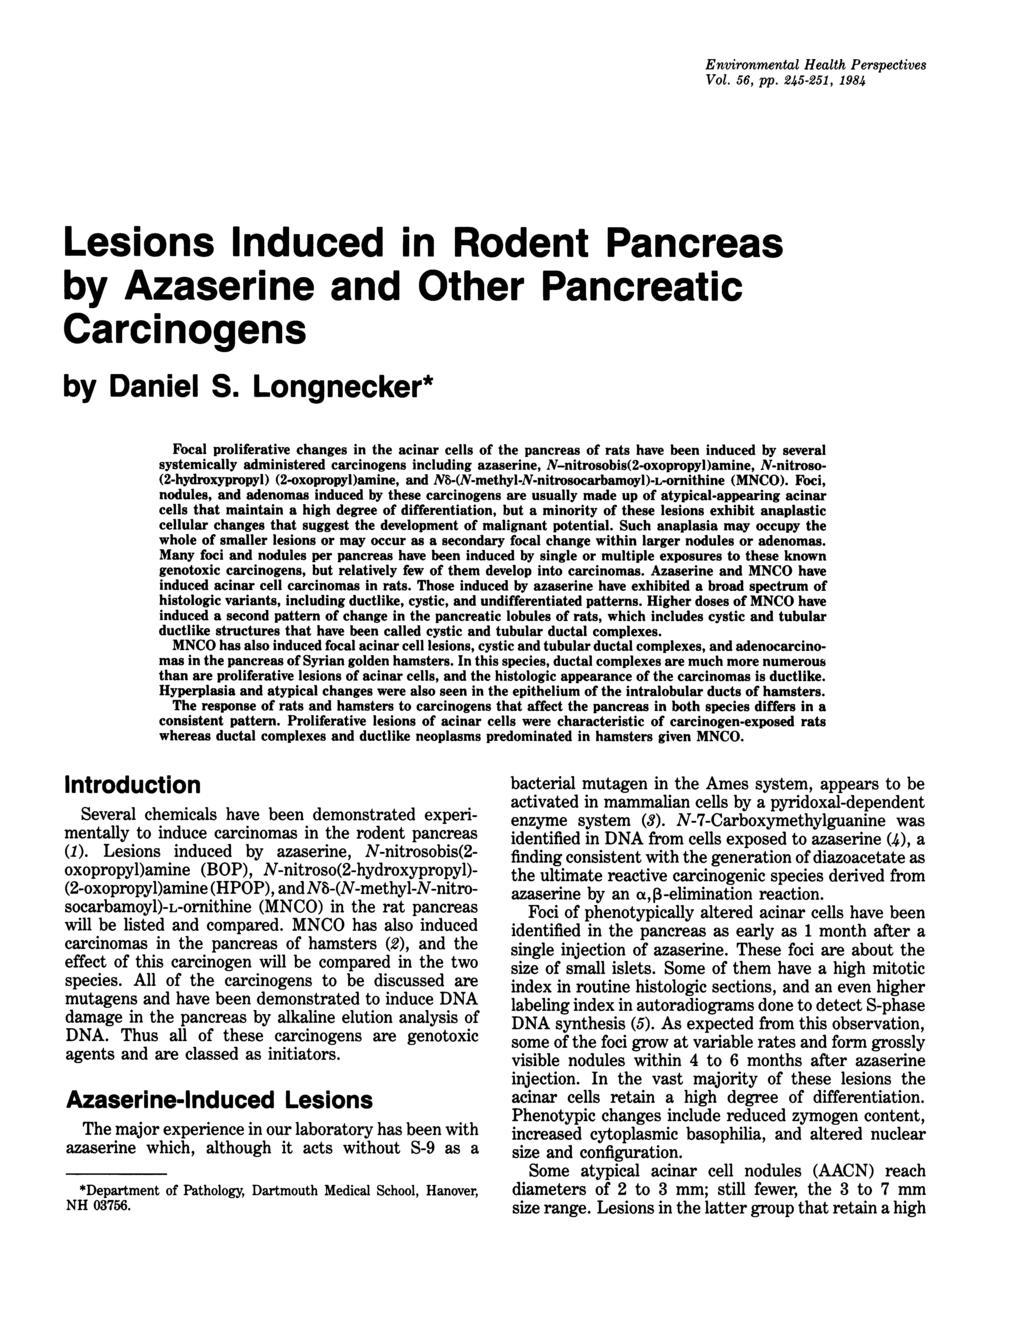 Environmental Health Perspectives Vol. 56, pp. 245-251, 1984 Lesions Induced in Rodent Pancreas by Azaserine and Other Pancreatic Carcinogens by Daniel S.